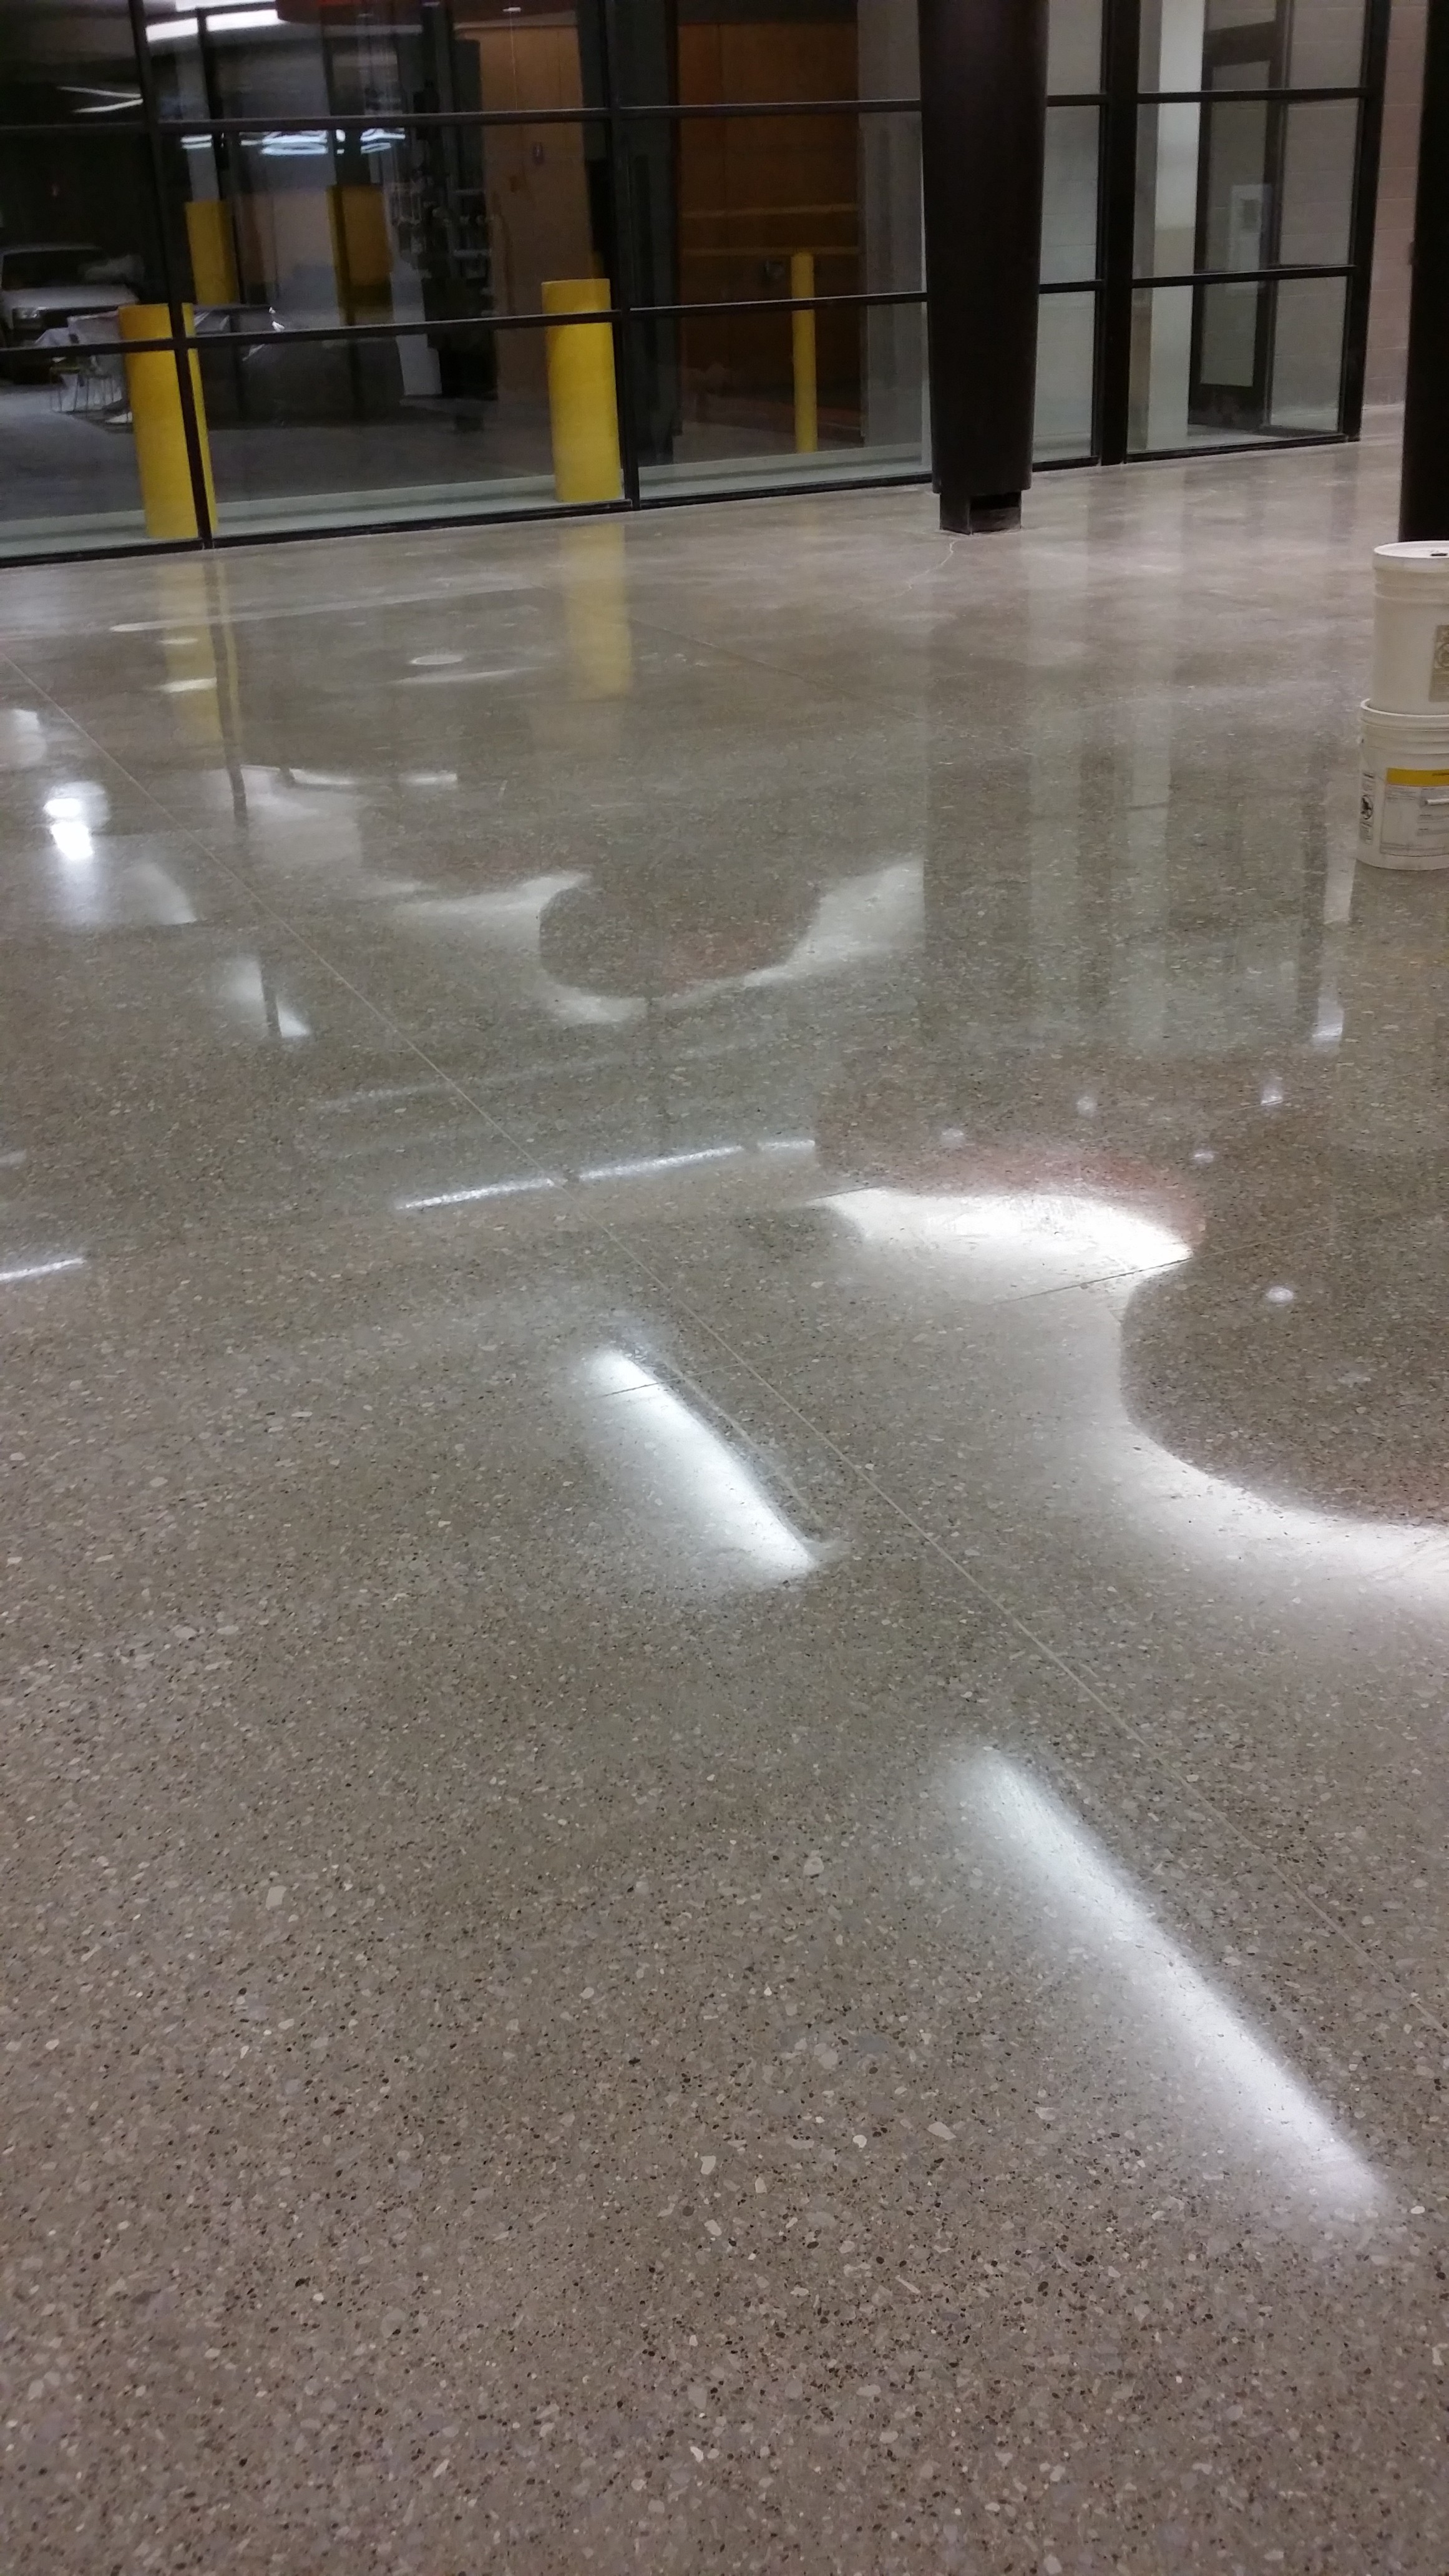 Commercial high gloss floor at MetroLINK that is so shiny, you can see the ceiling.